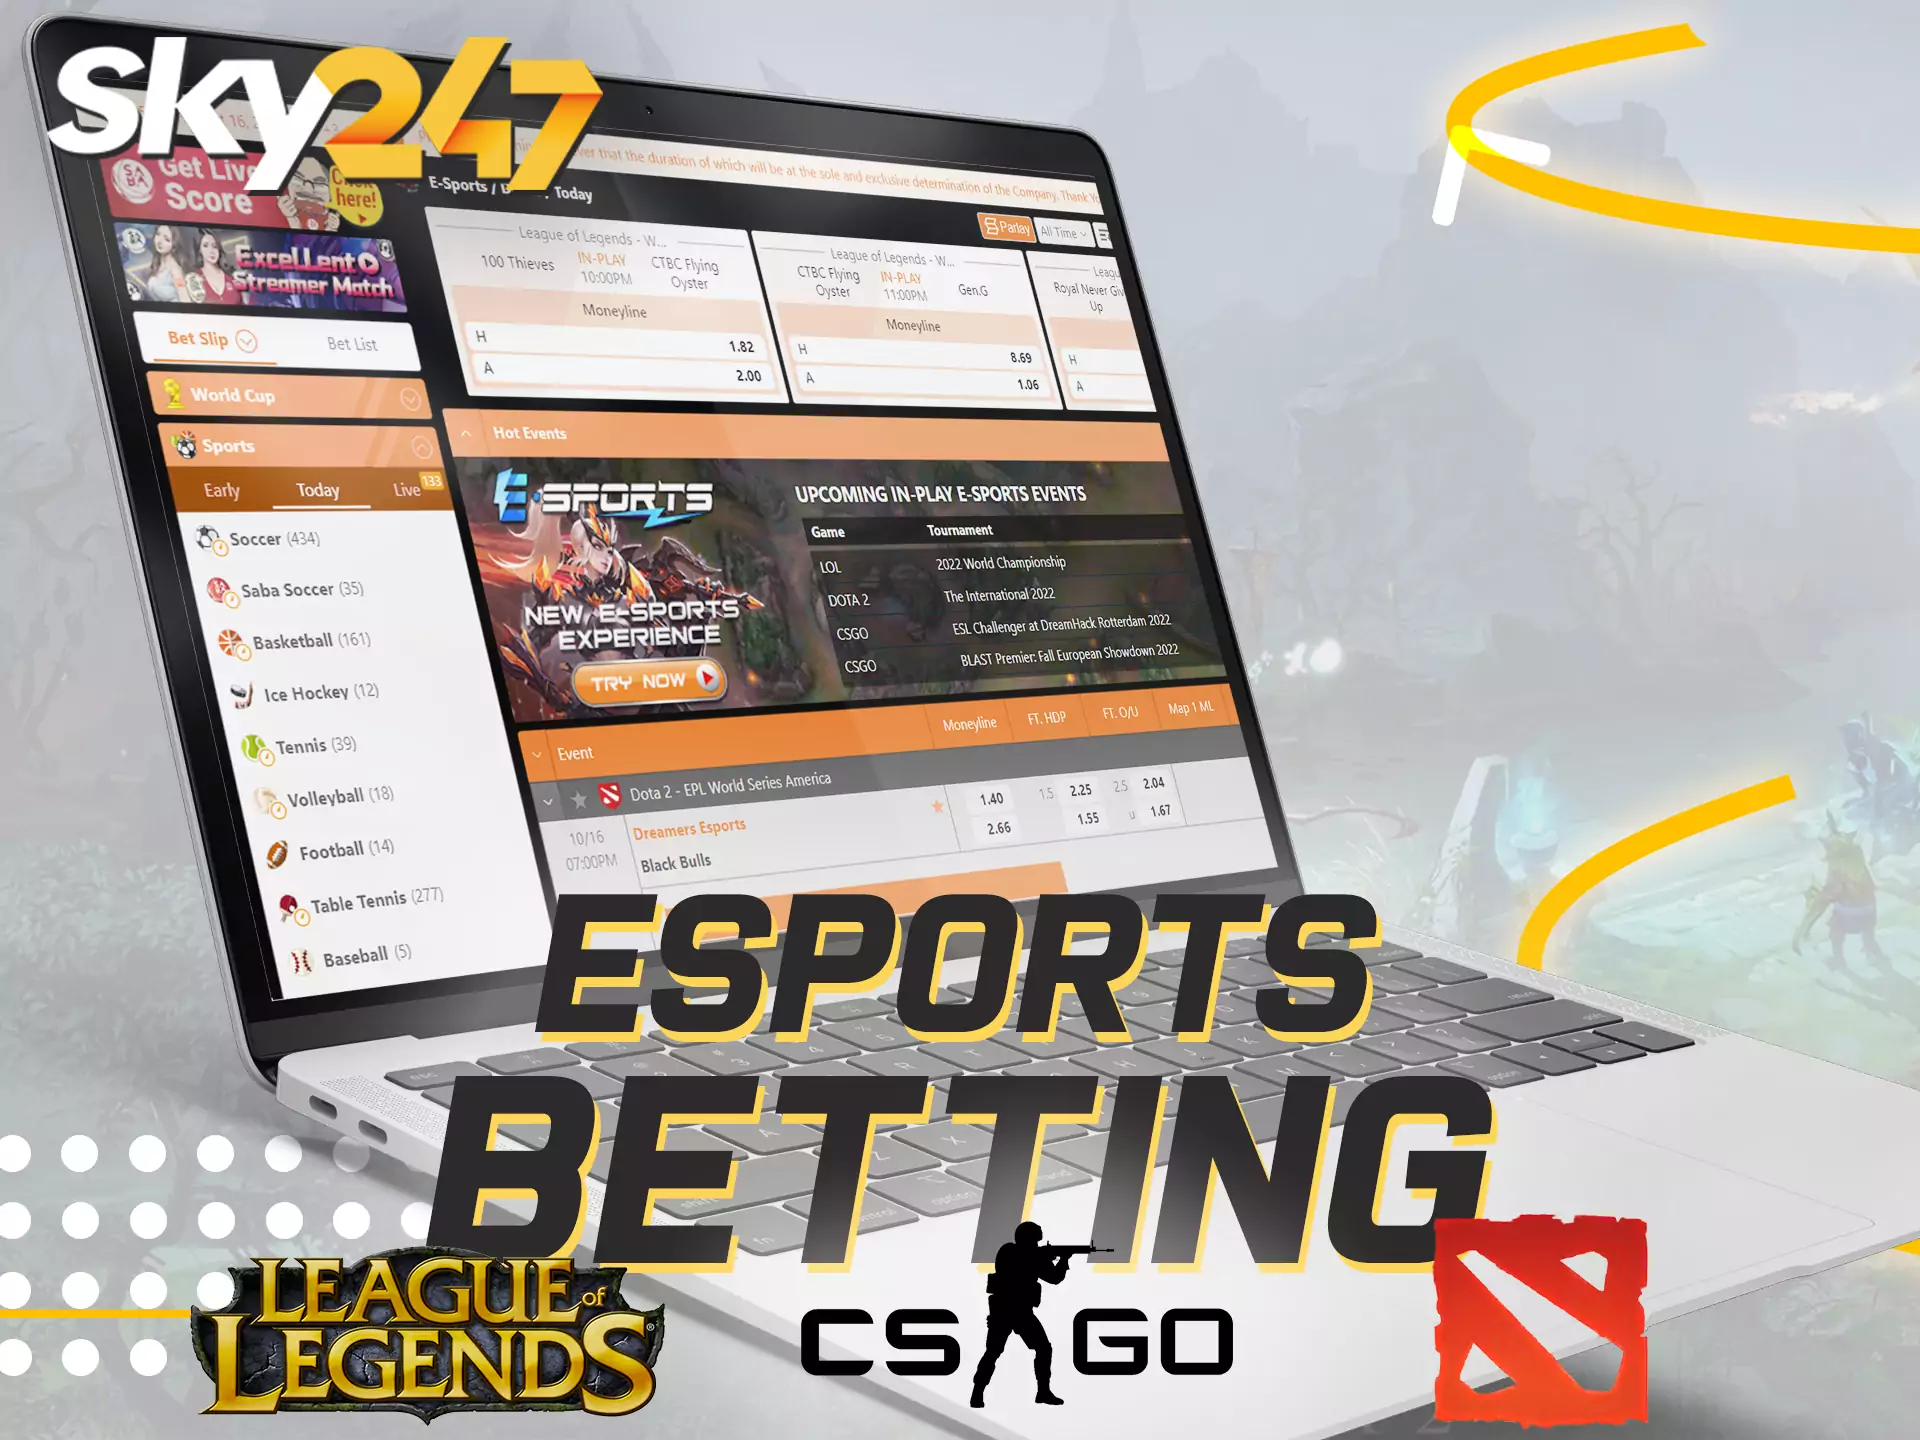 In the Sky247 sportsbook, you also find esports matches available for betting.